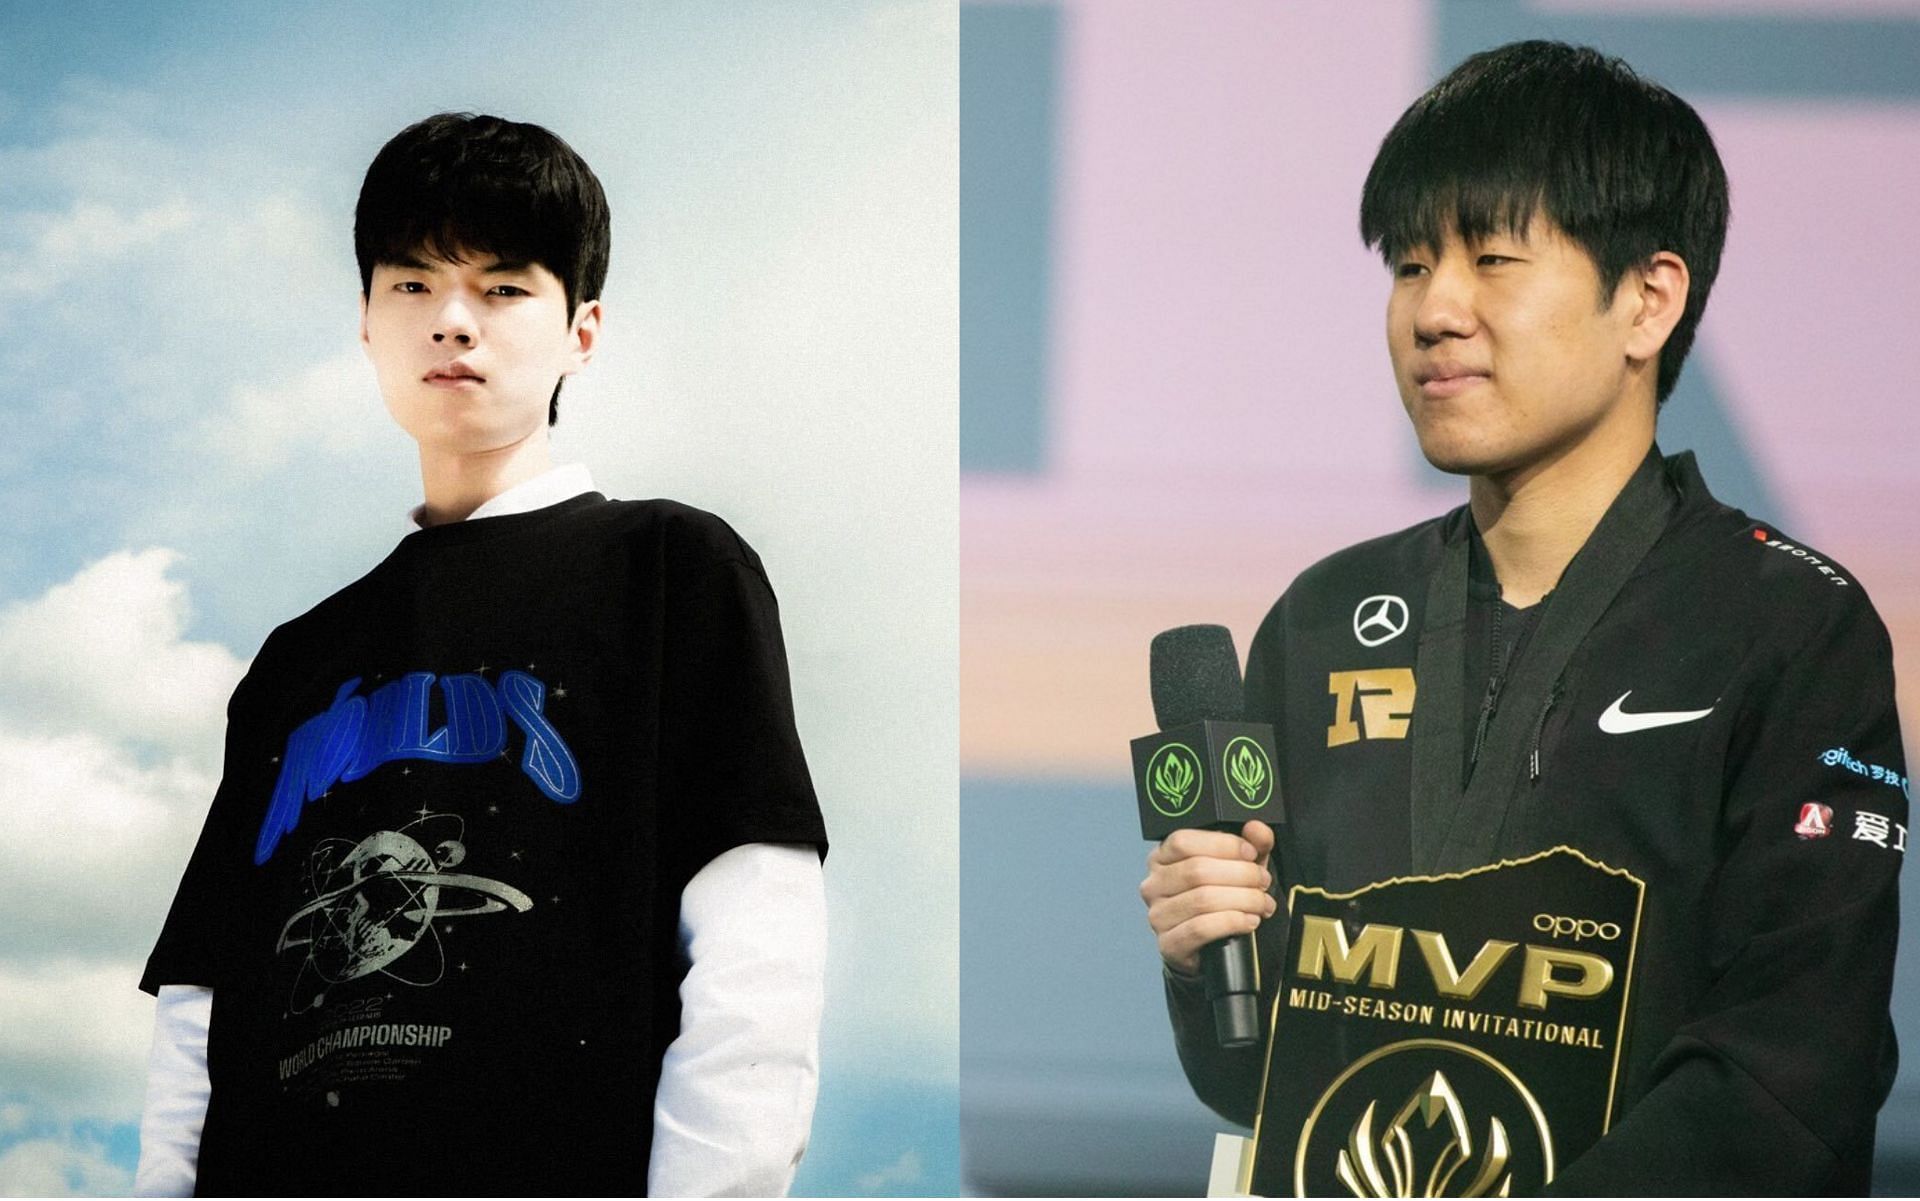 The Gala vs Deft matchup will be one to watch at League of Legends Worlds 2022 play-ins (Image via Riot Games)